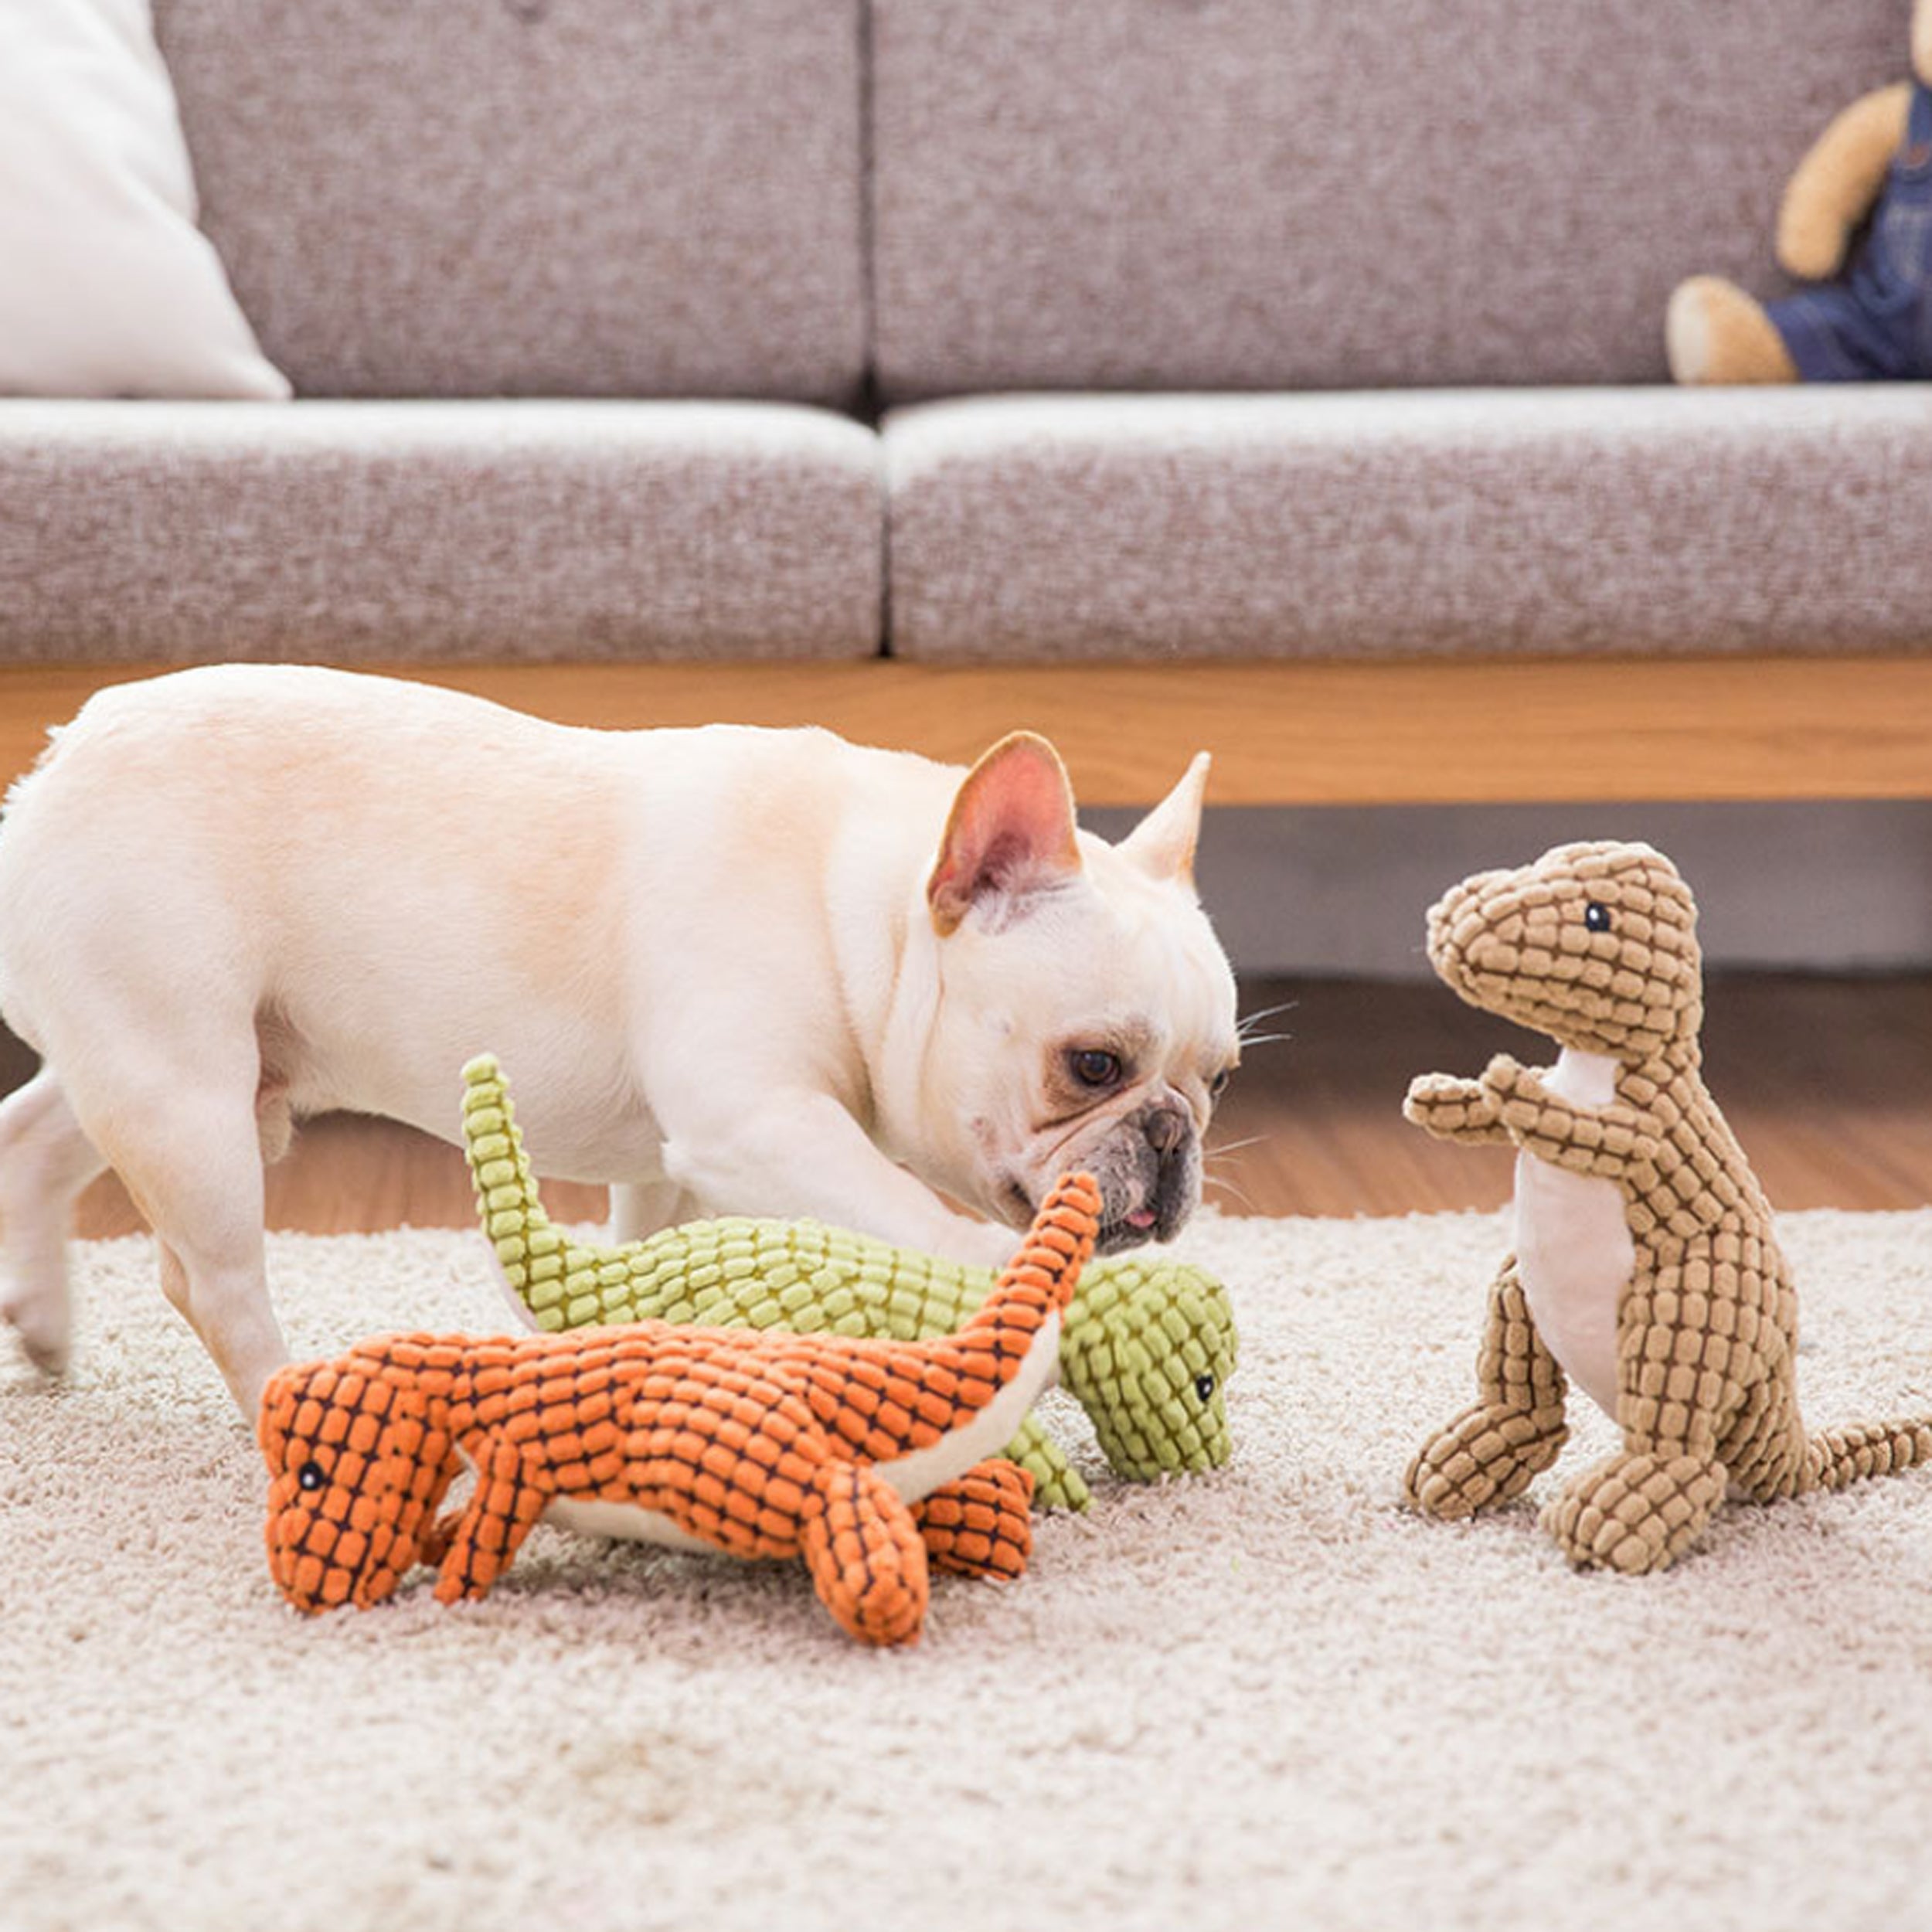 Entertain Your Puppy with JSBlueRidge Dinosaur Shape Chewing Toy